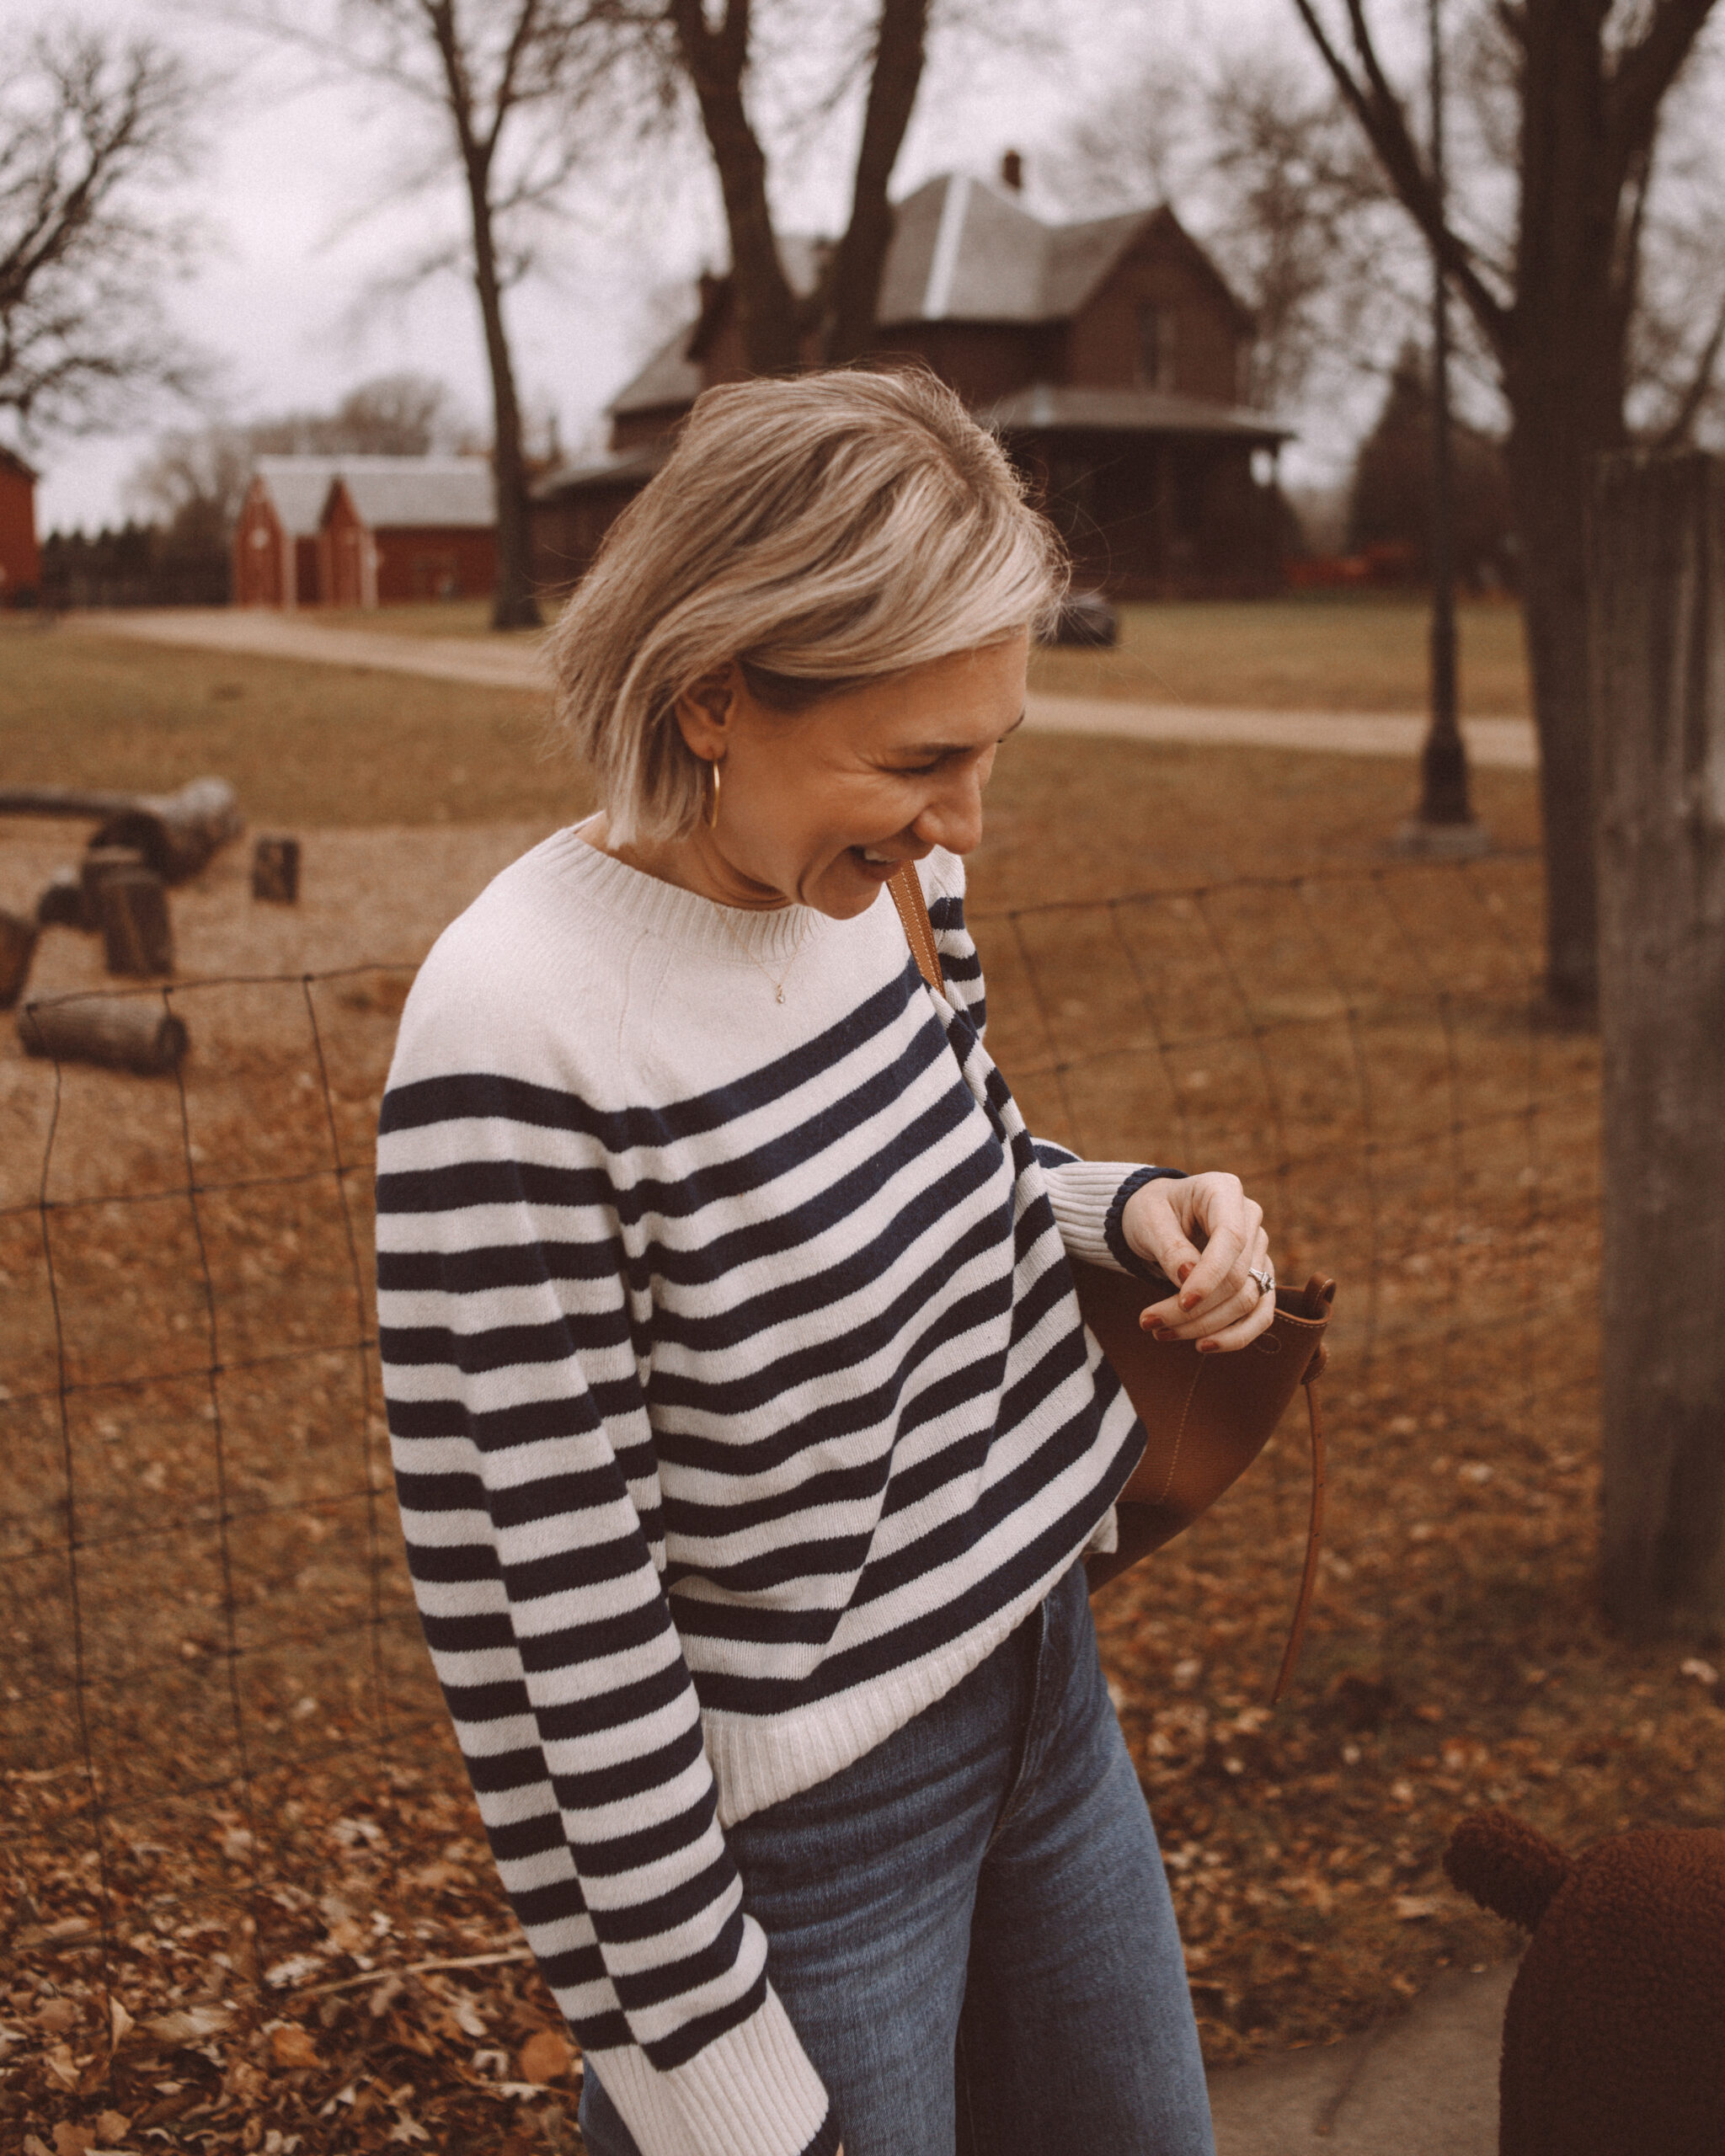 Karin Emily wears a striped cashmere sweater and dark wash jeans with a polene tote bag